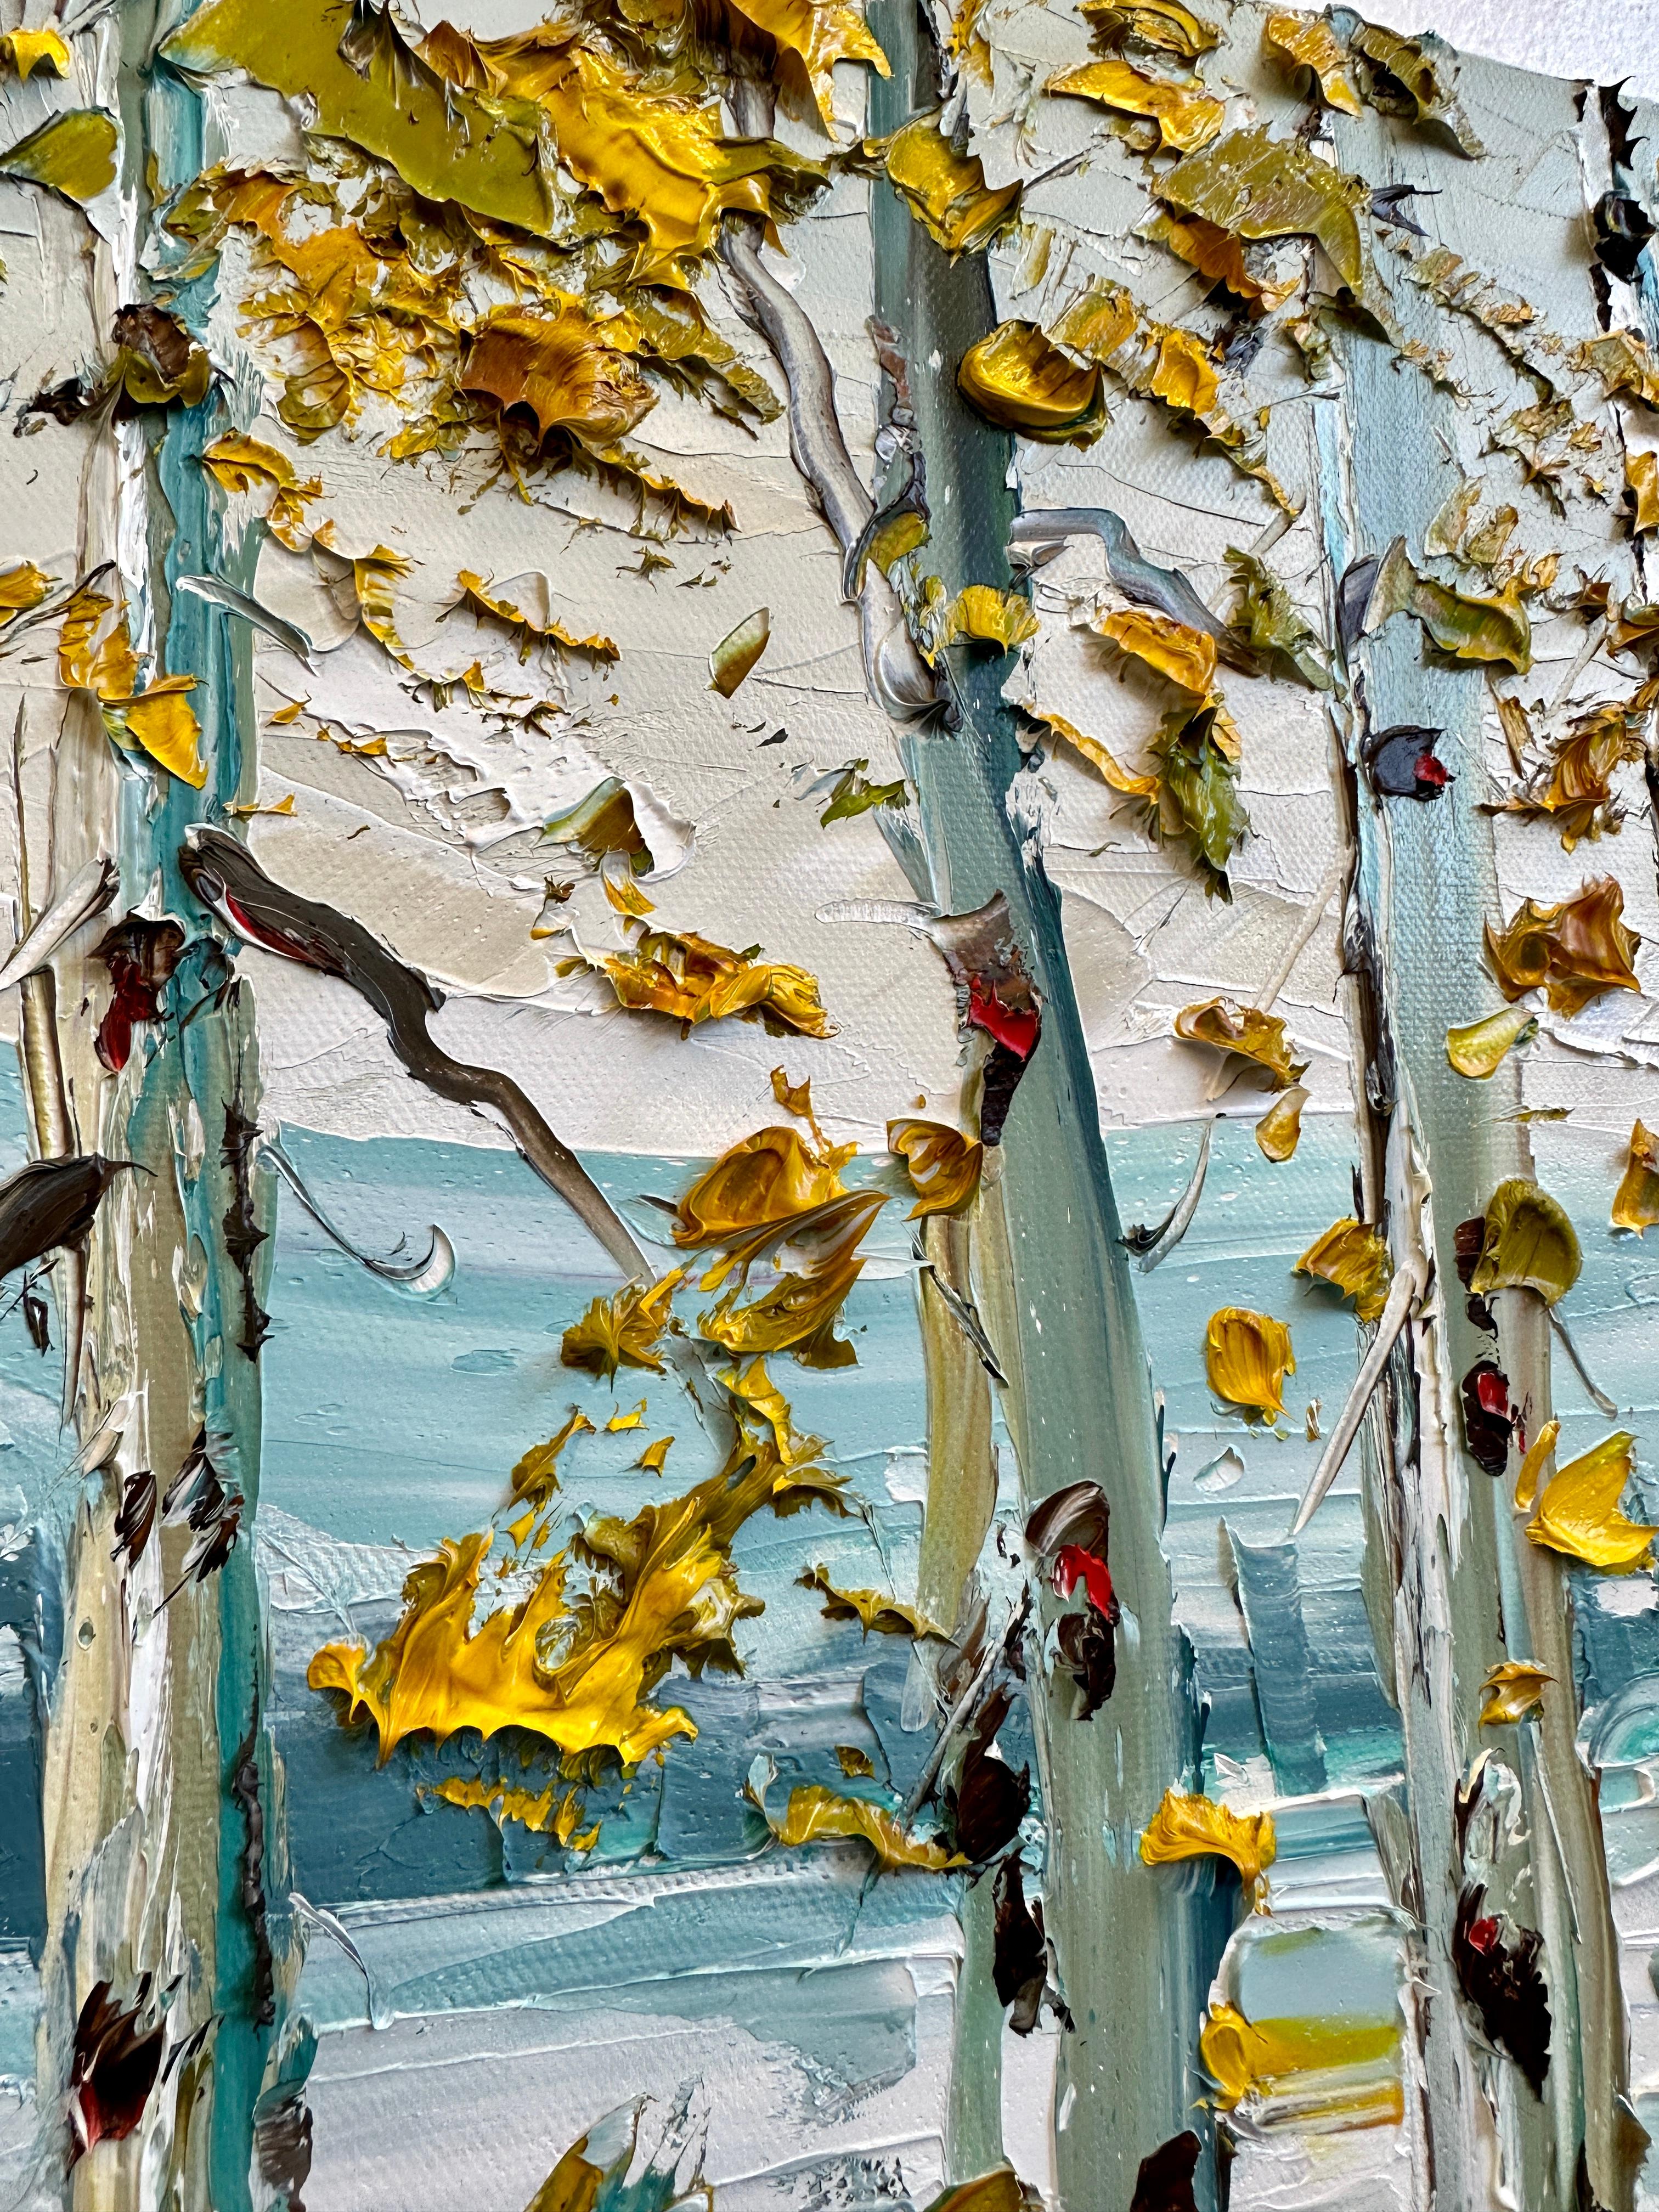 <p>Artist Comments<br>Inspired by the azure waters of iconic Lake Tahoe, artist Lisa Elley portrays the beauty of the mountains in the fall season. Her signature impasto technique captures the colorful changing of the leaves on the birch trees. The